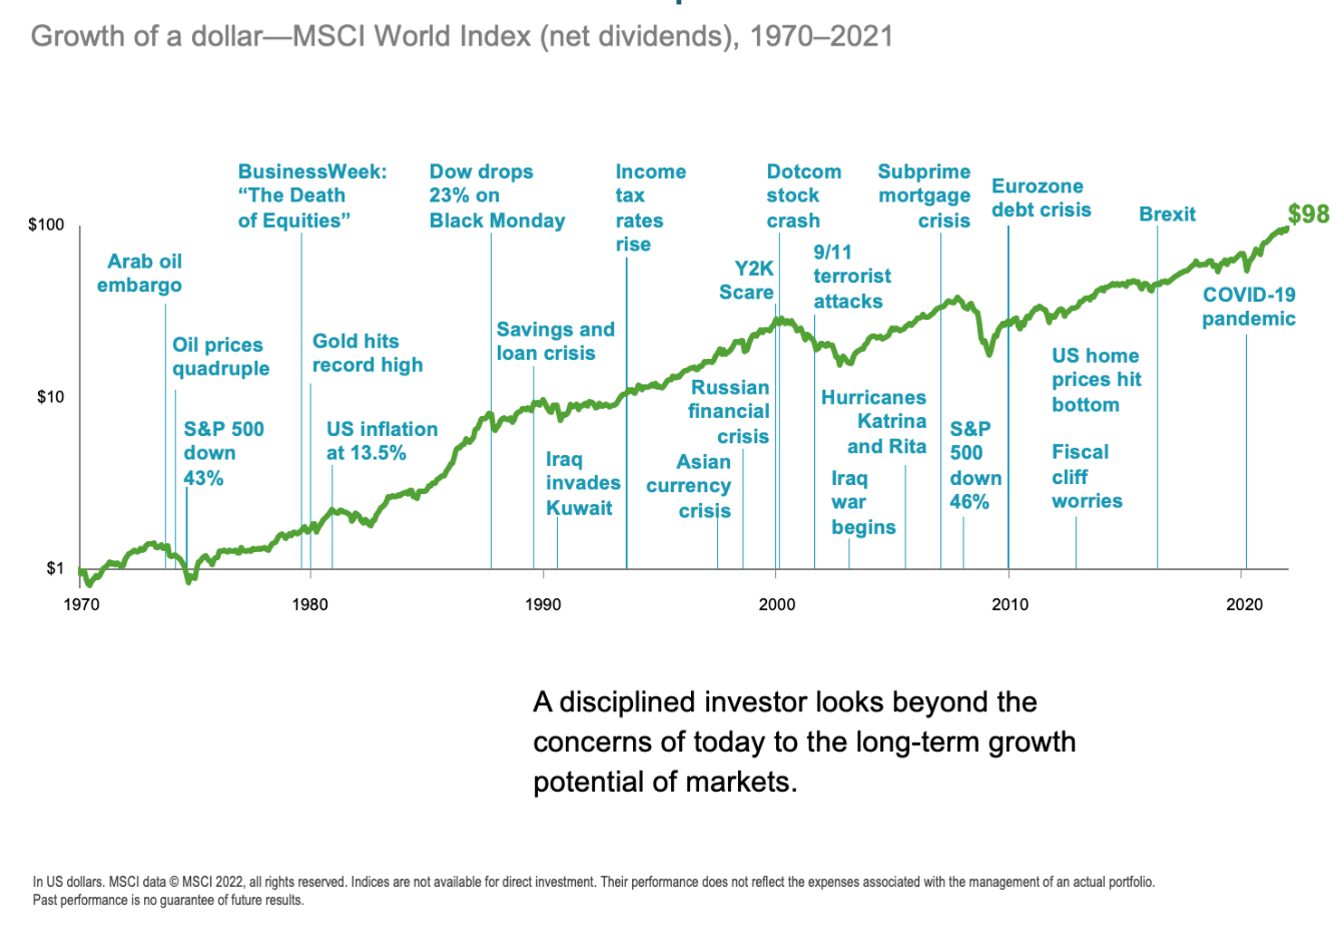 Graph shows an overall rise from $1-$98 in Growth of a Dollar - MSCI World Index (net dividends), 1970-2021